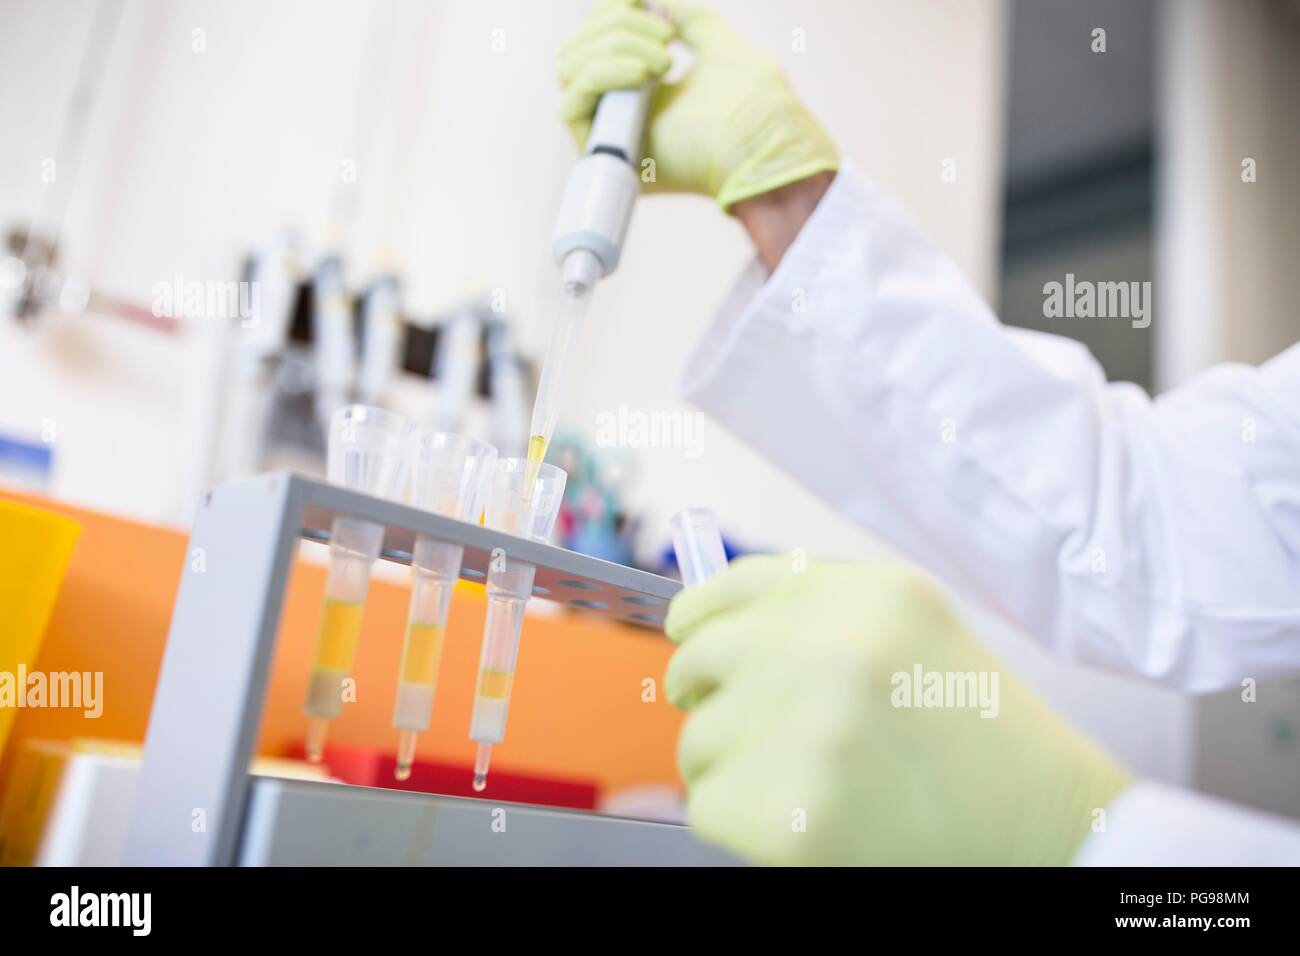 Technician pipetting samples into cartridges for solid phase extraction (SPE). SPE is used to separate biological compounds from a mixture for further analysis. Stock Photo